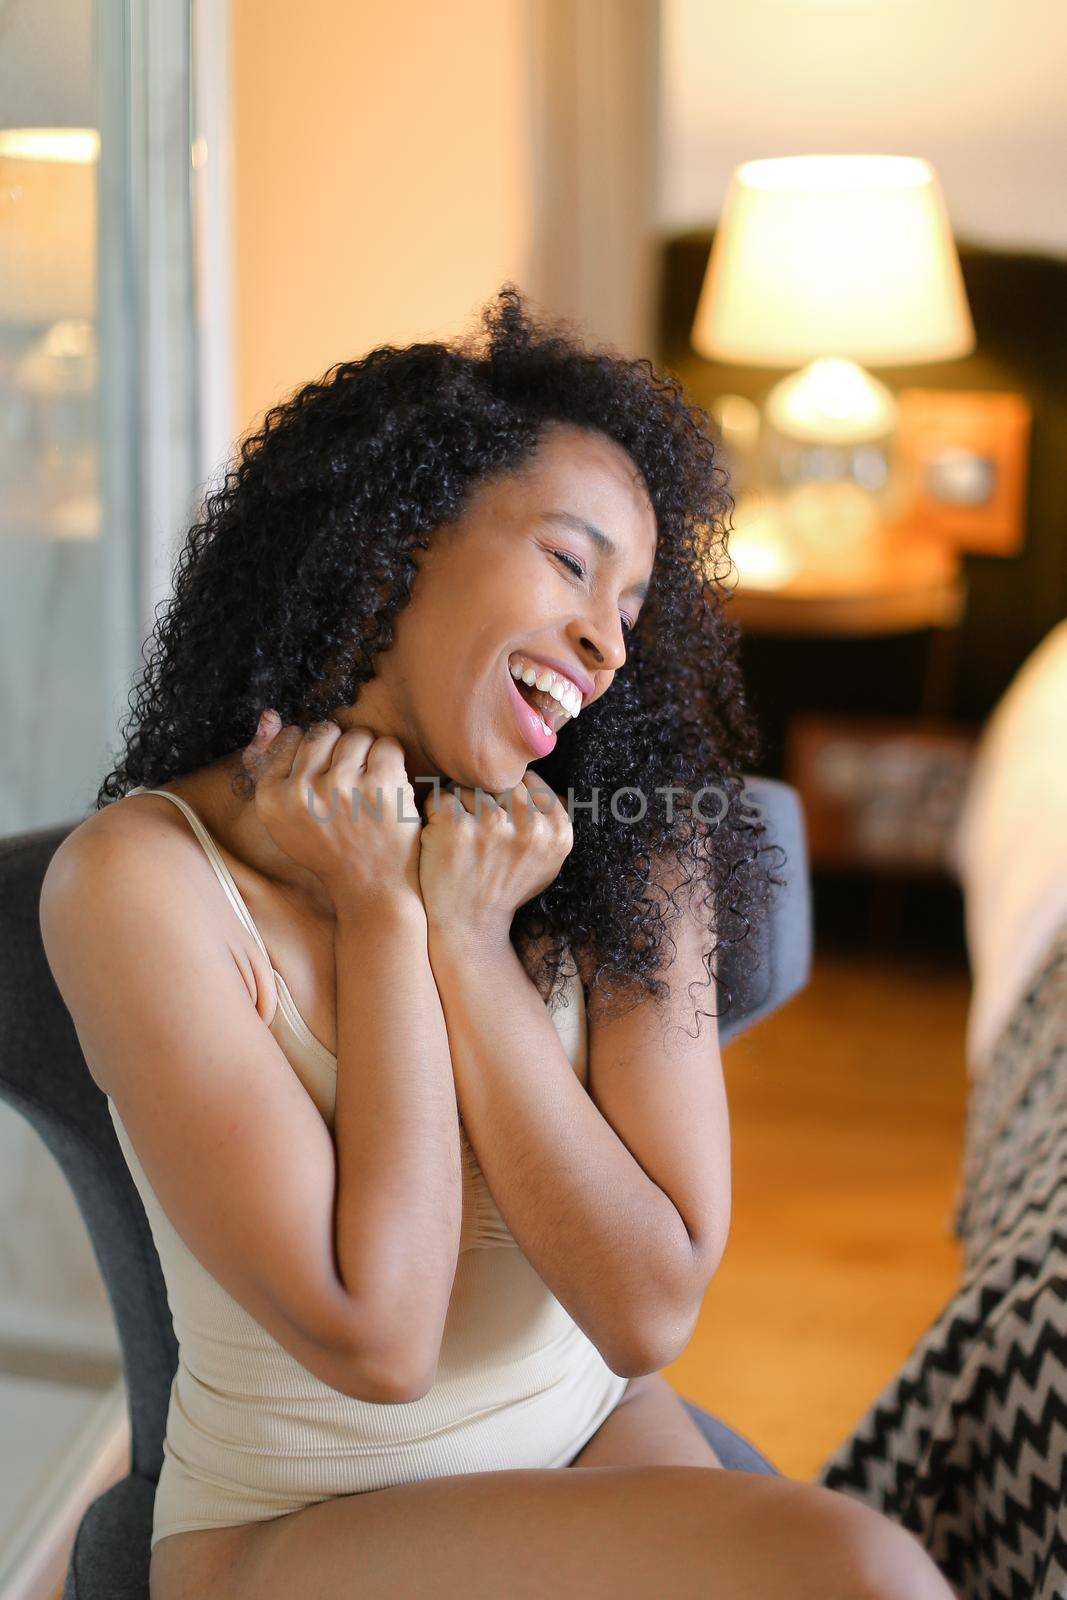 Young gladden afro american woman sitting in room and wearing beige swimsuit. Concept of hotel photo session in lingerie.